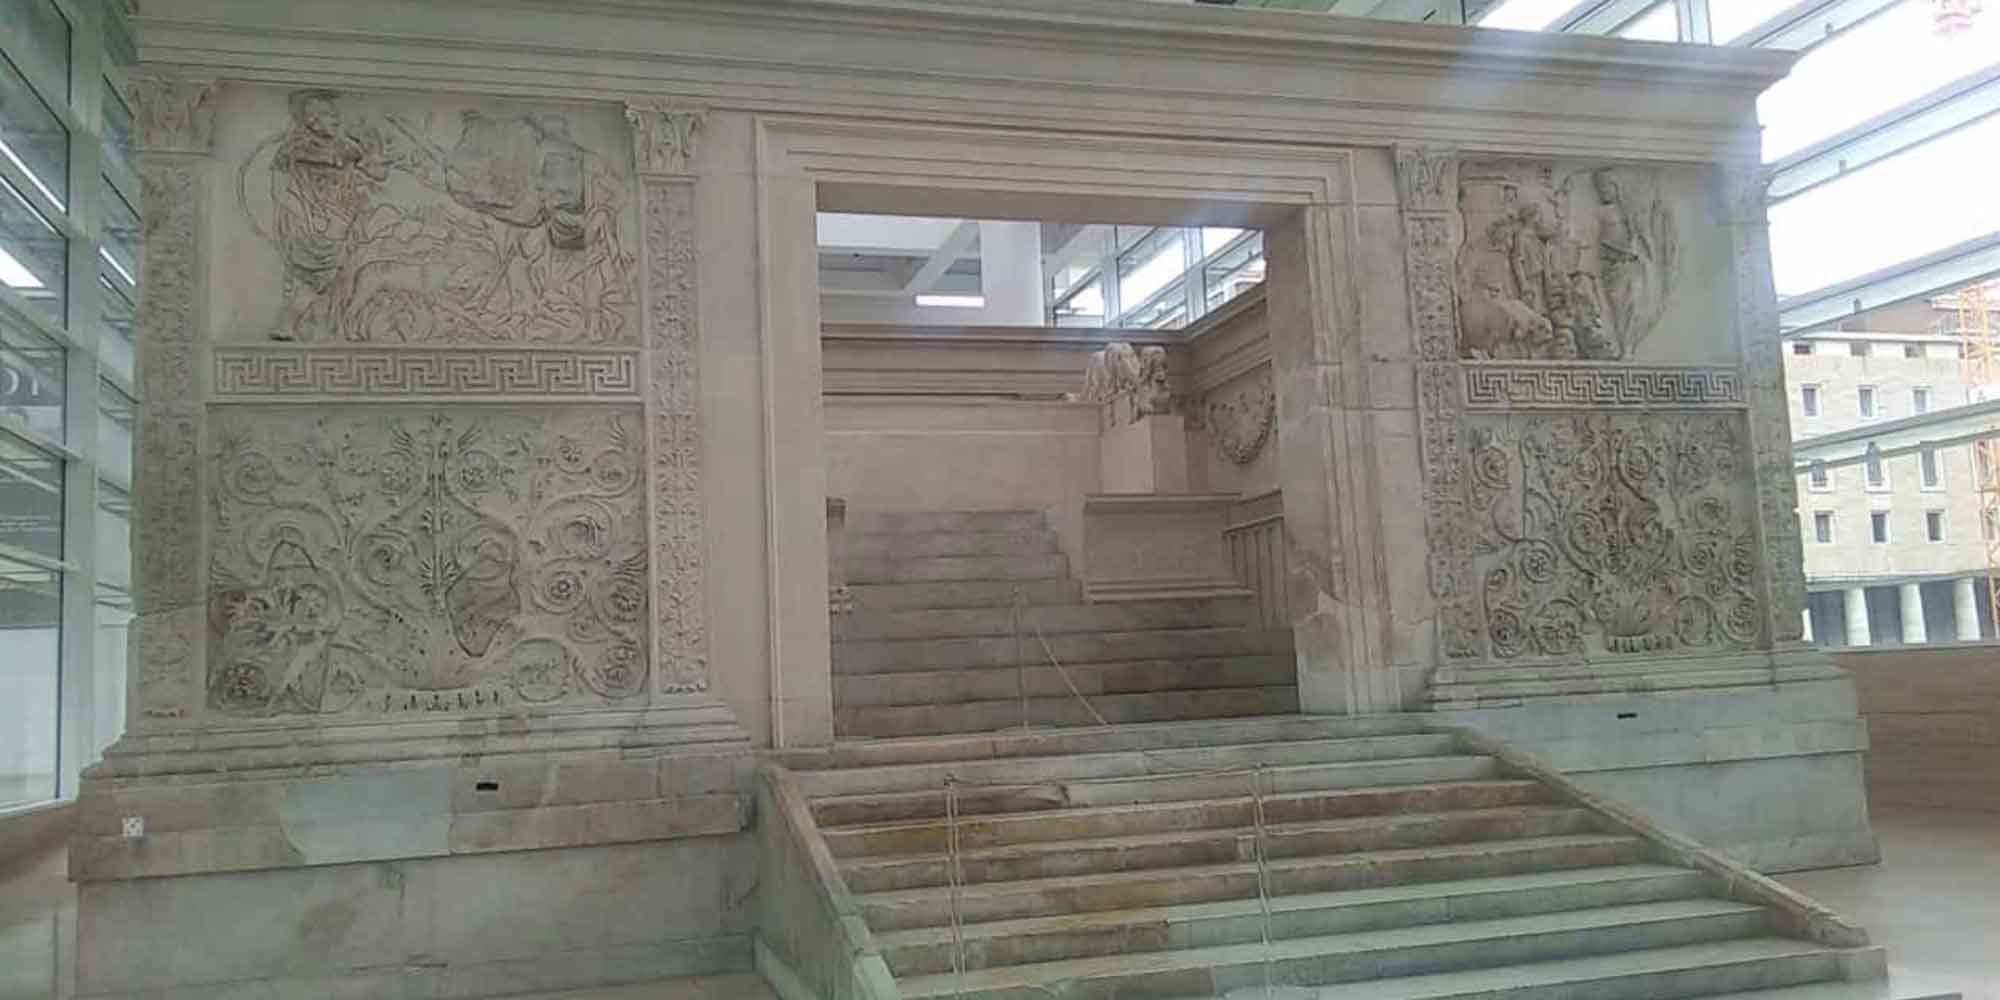 A Poem for the Ara Pacis Augustae